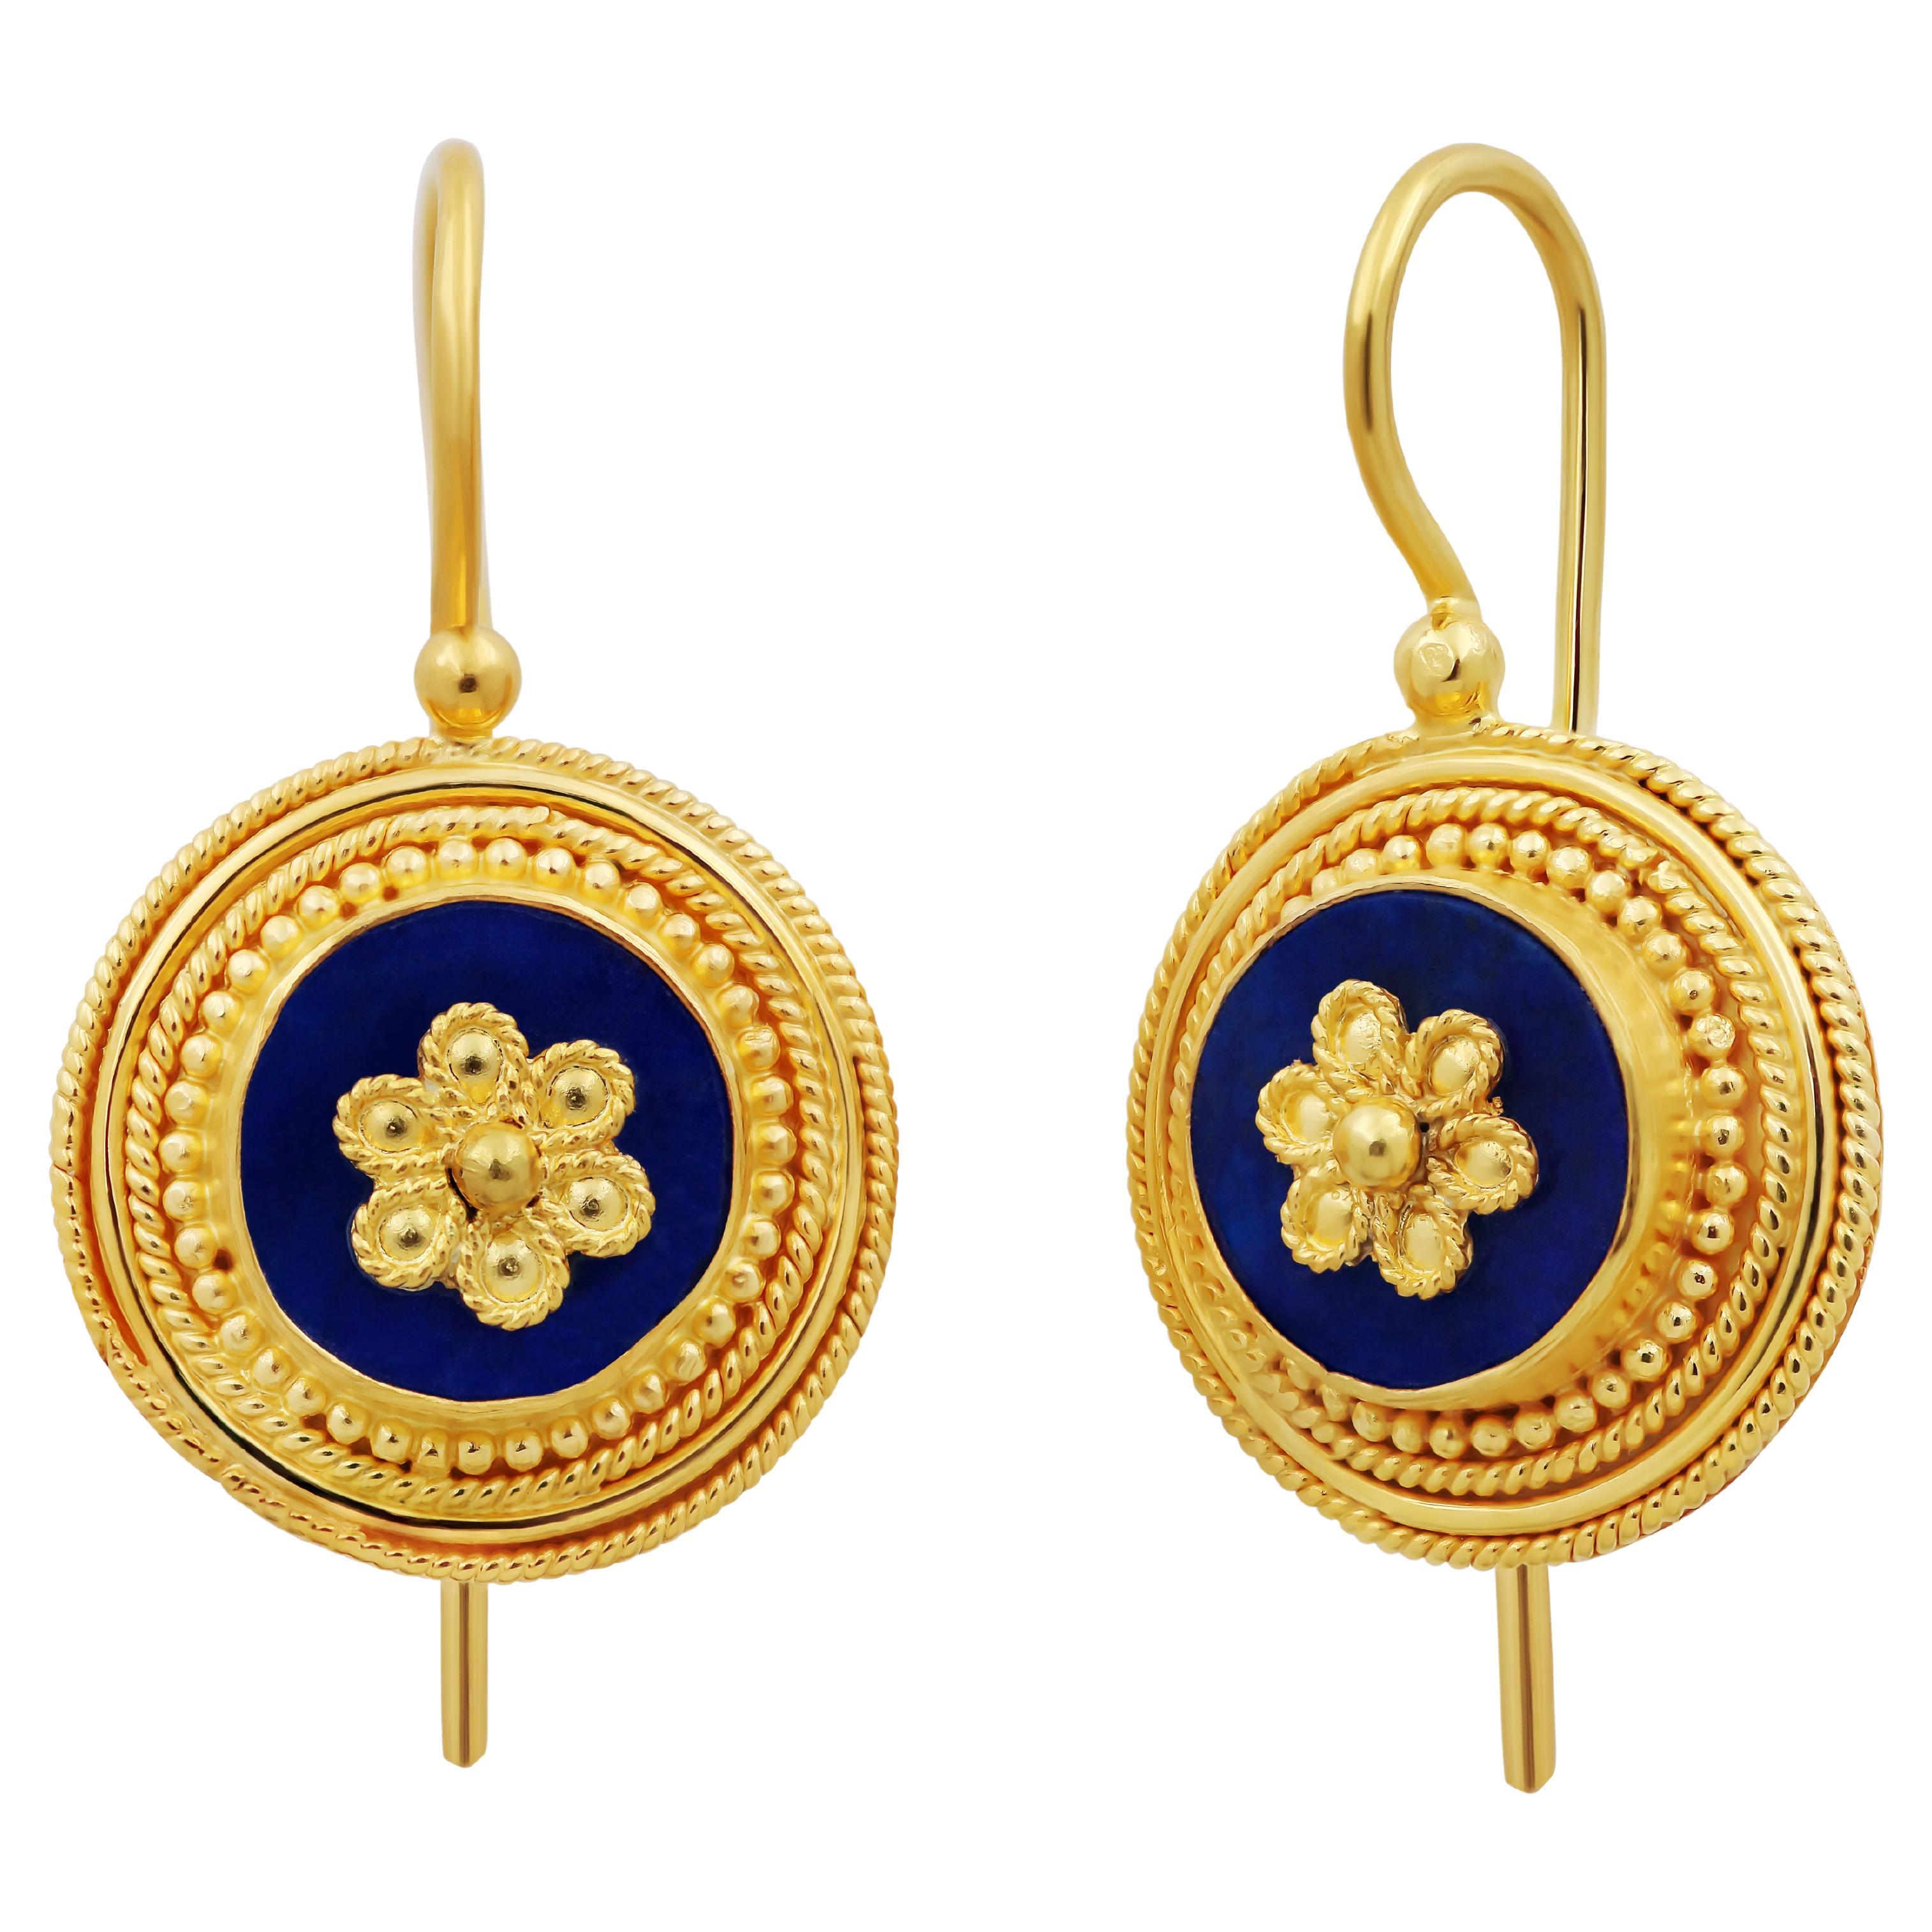 Dimos 22k Gold Lapis Lazuli Neoclassic Earrings For Sale